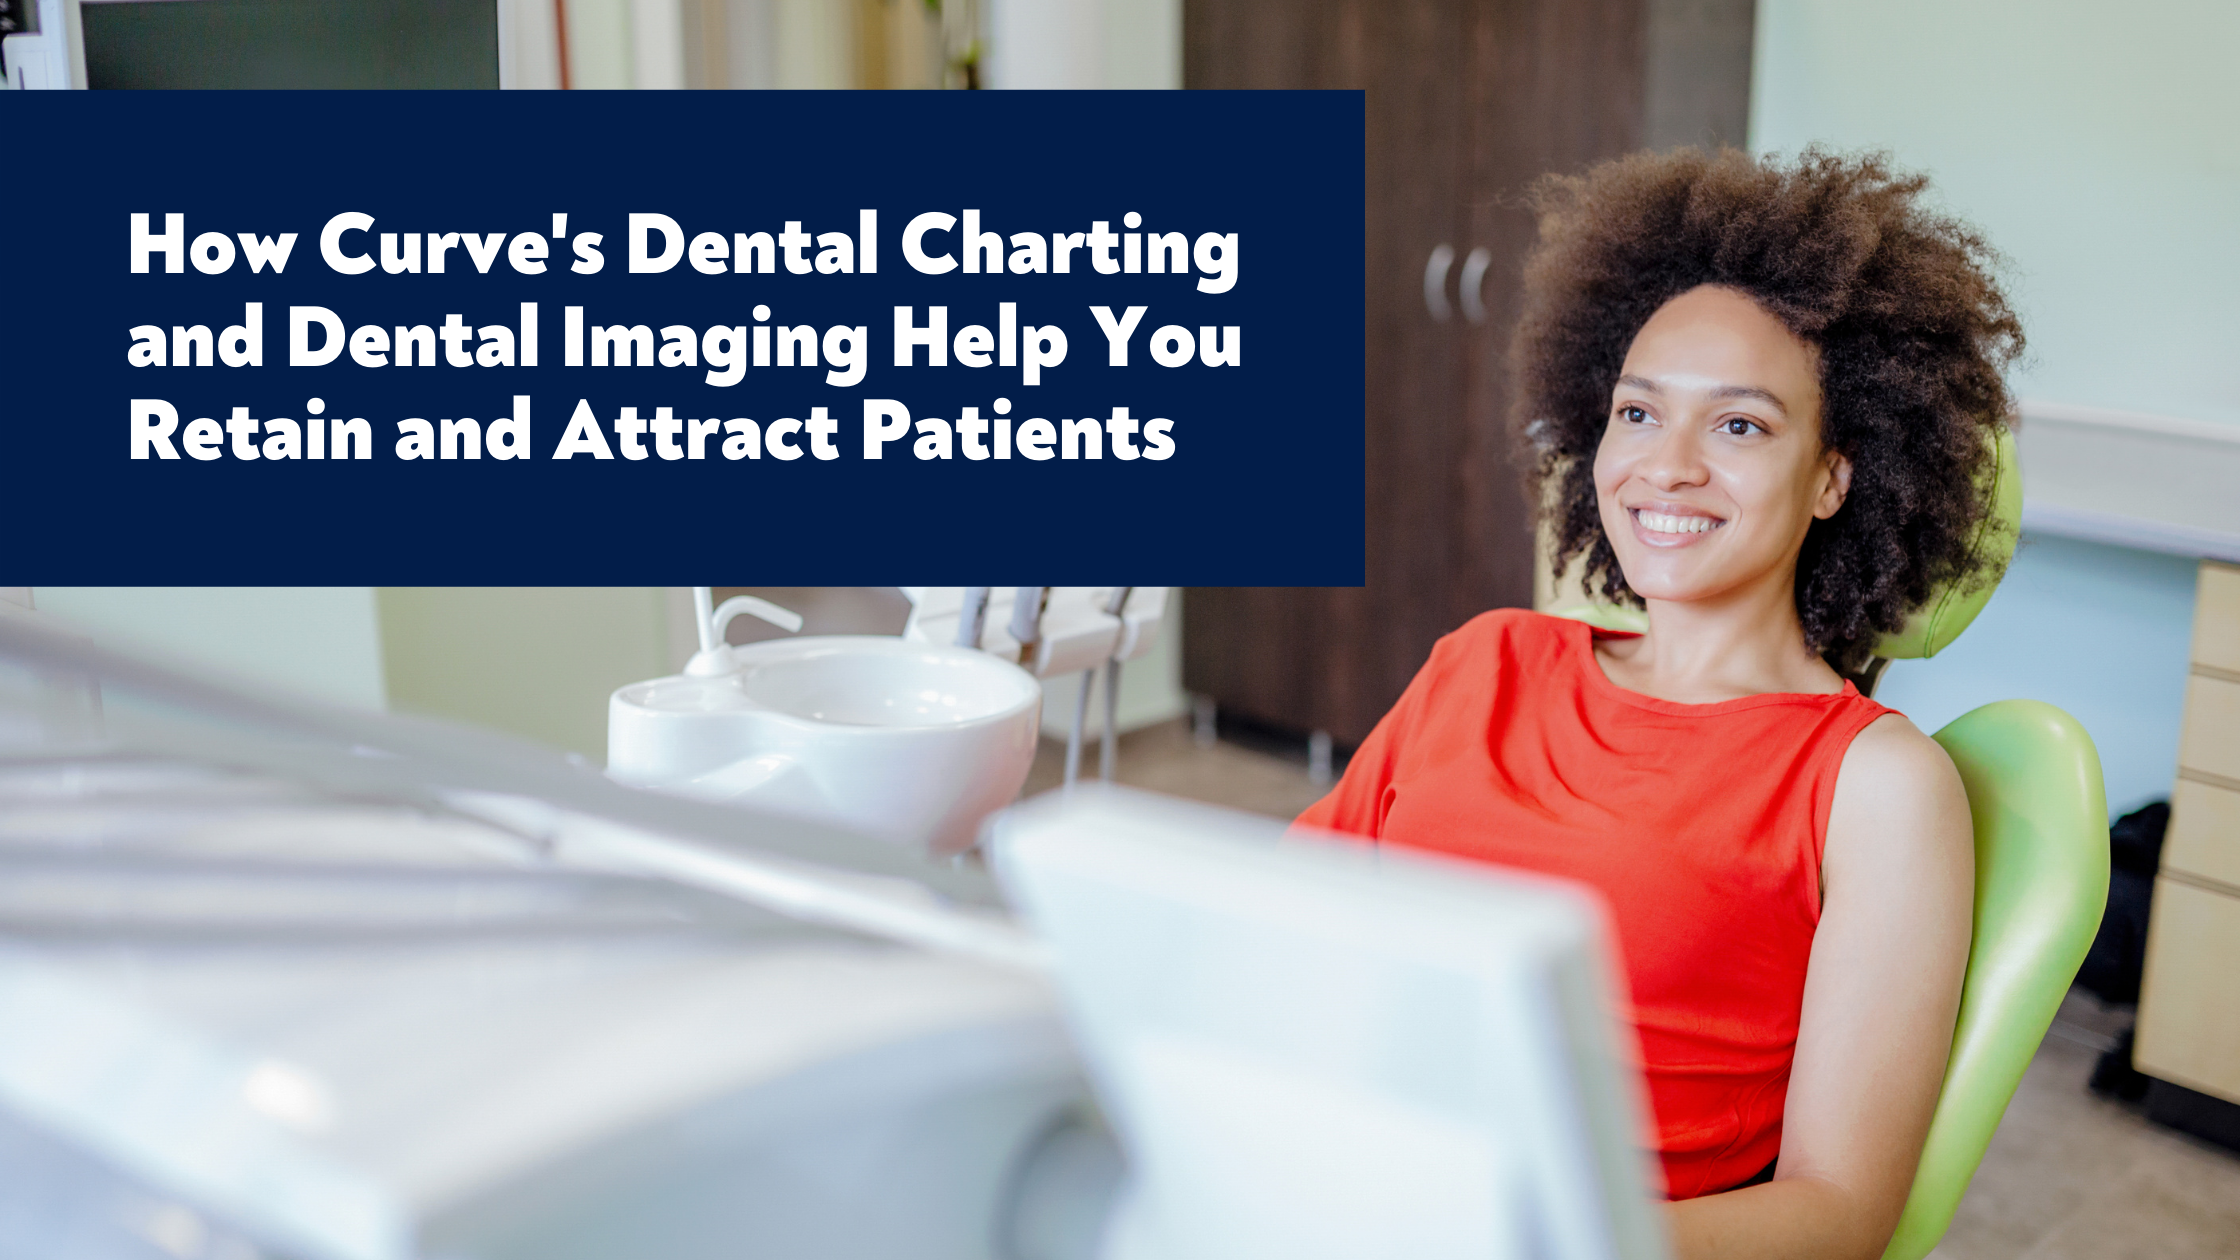 Attracting and Retaining Dental Patients with Curve Imaging and Charting